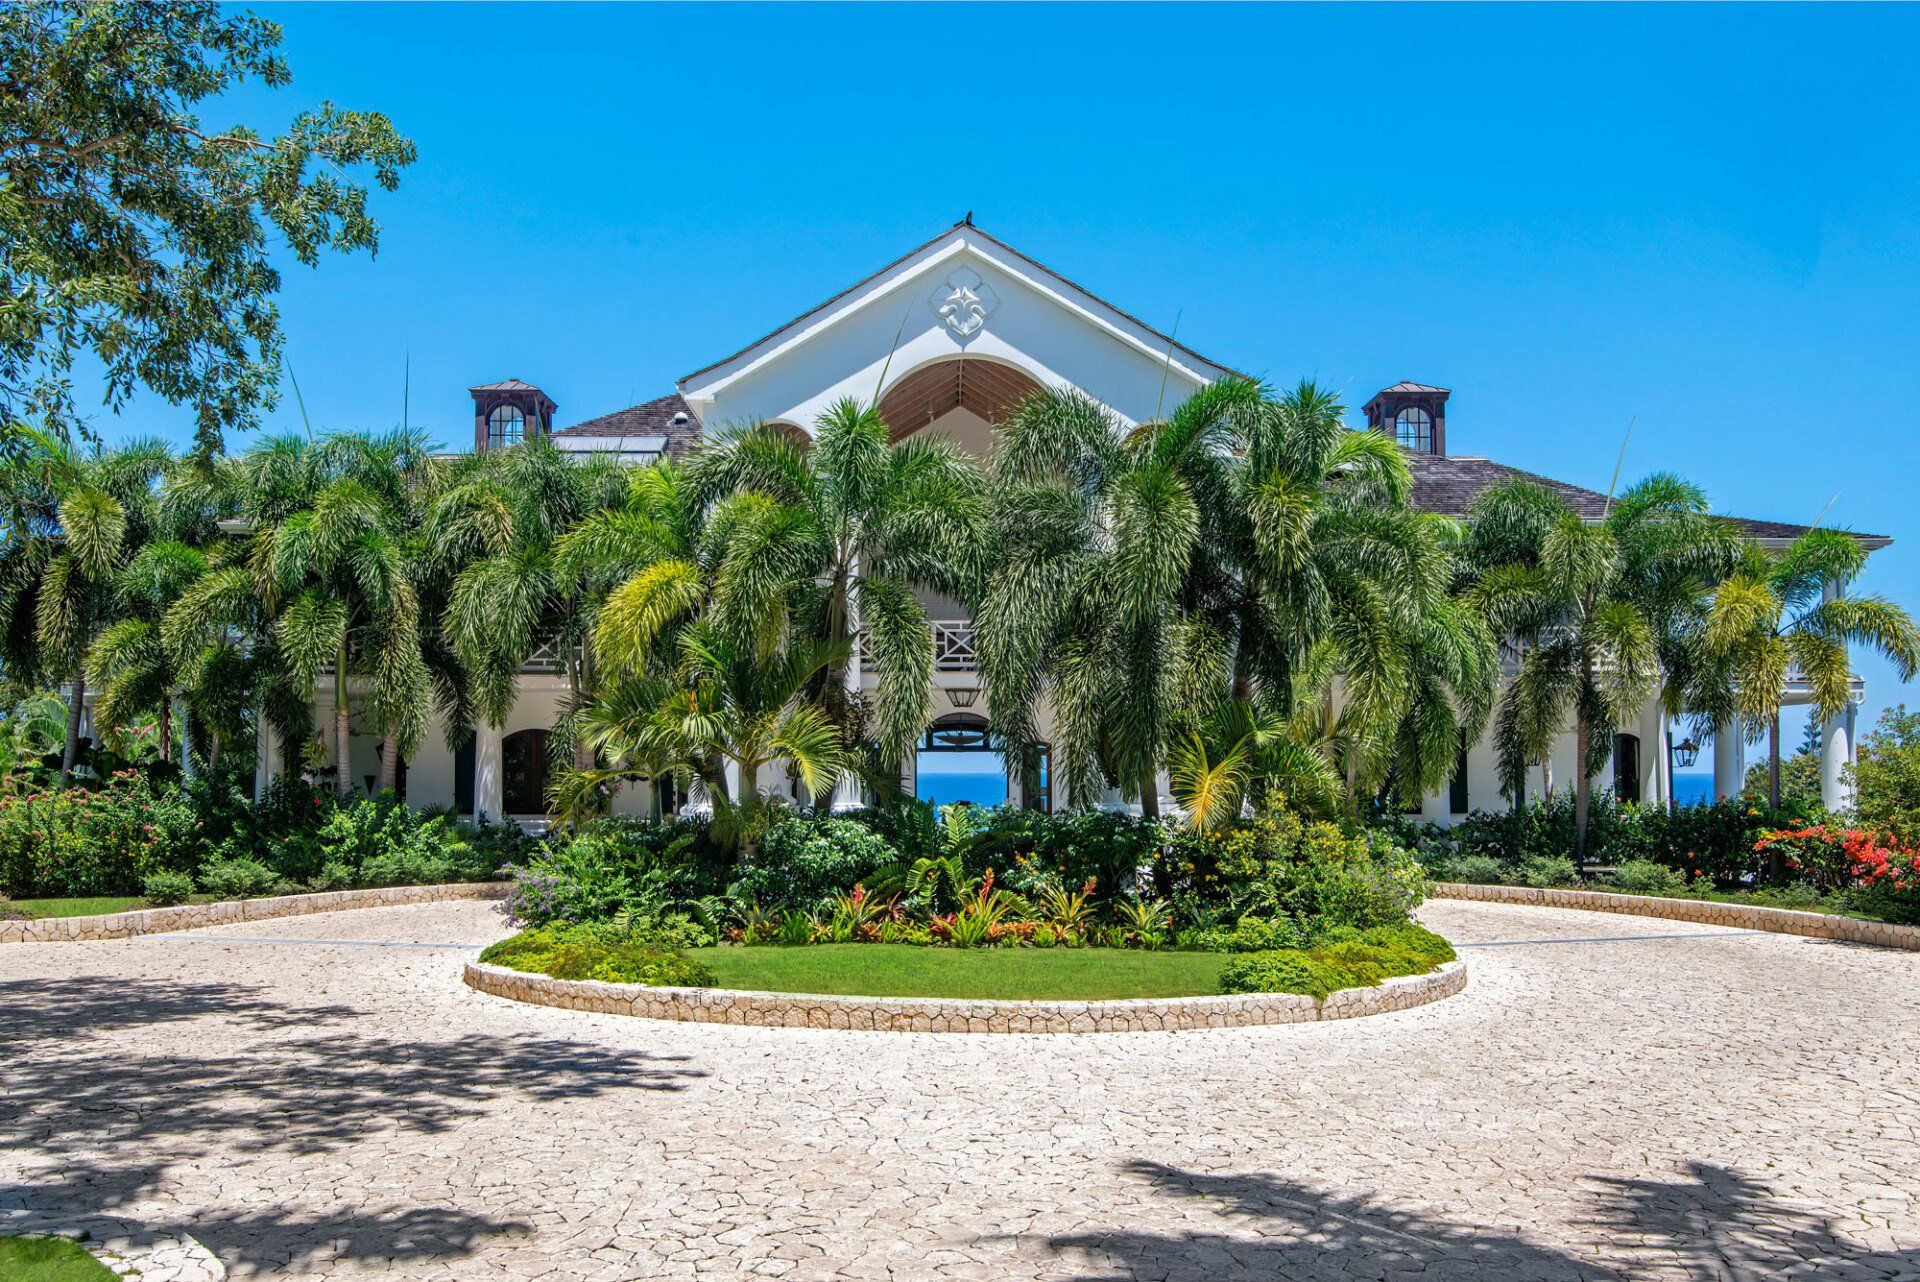 The best Jamaica vacation rental